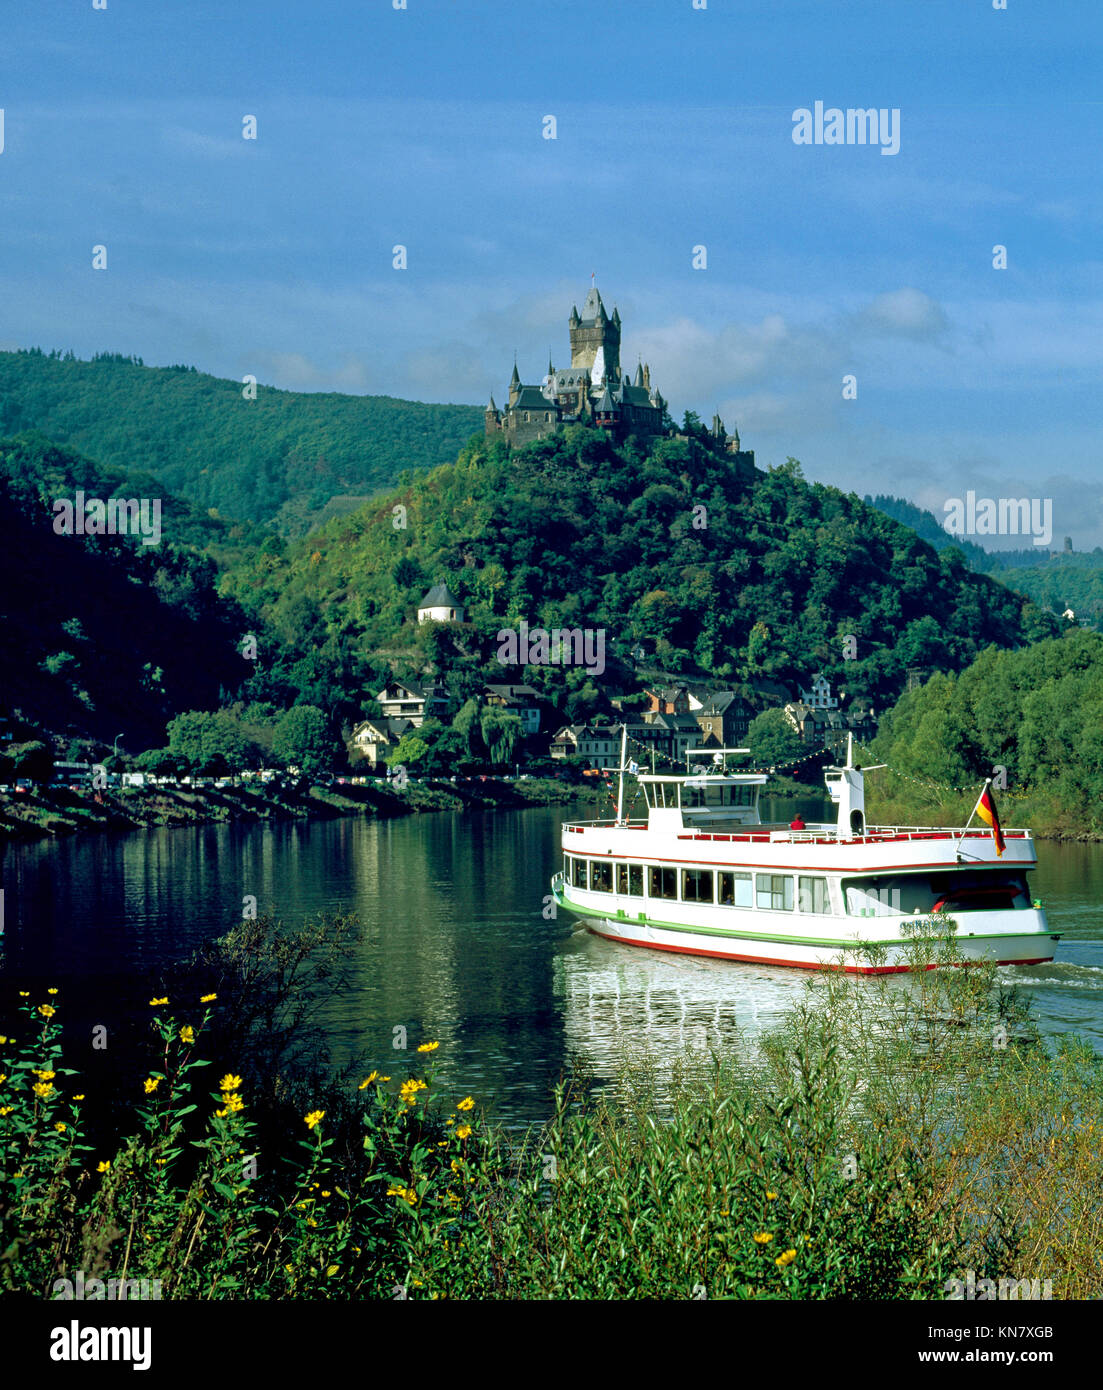 Pleasure Boat on the River Moselle near Cochem, overlooked by the Reichsburg Castle, Rhineland - Palatinate, Germany. Stock Photo